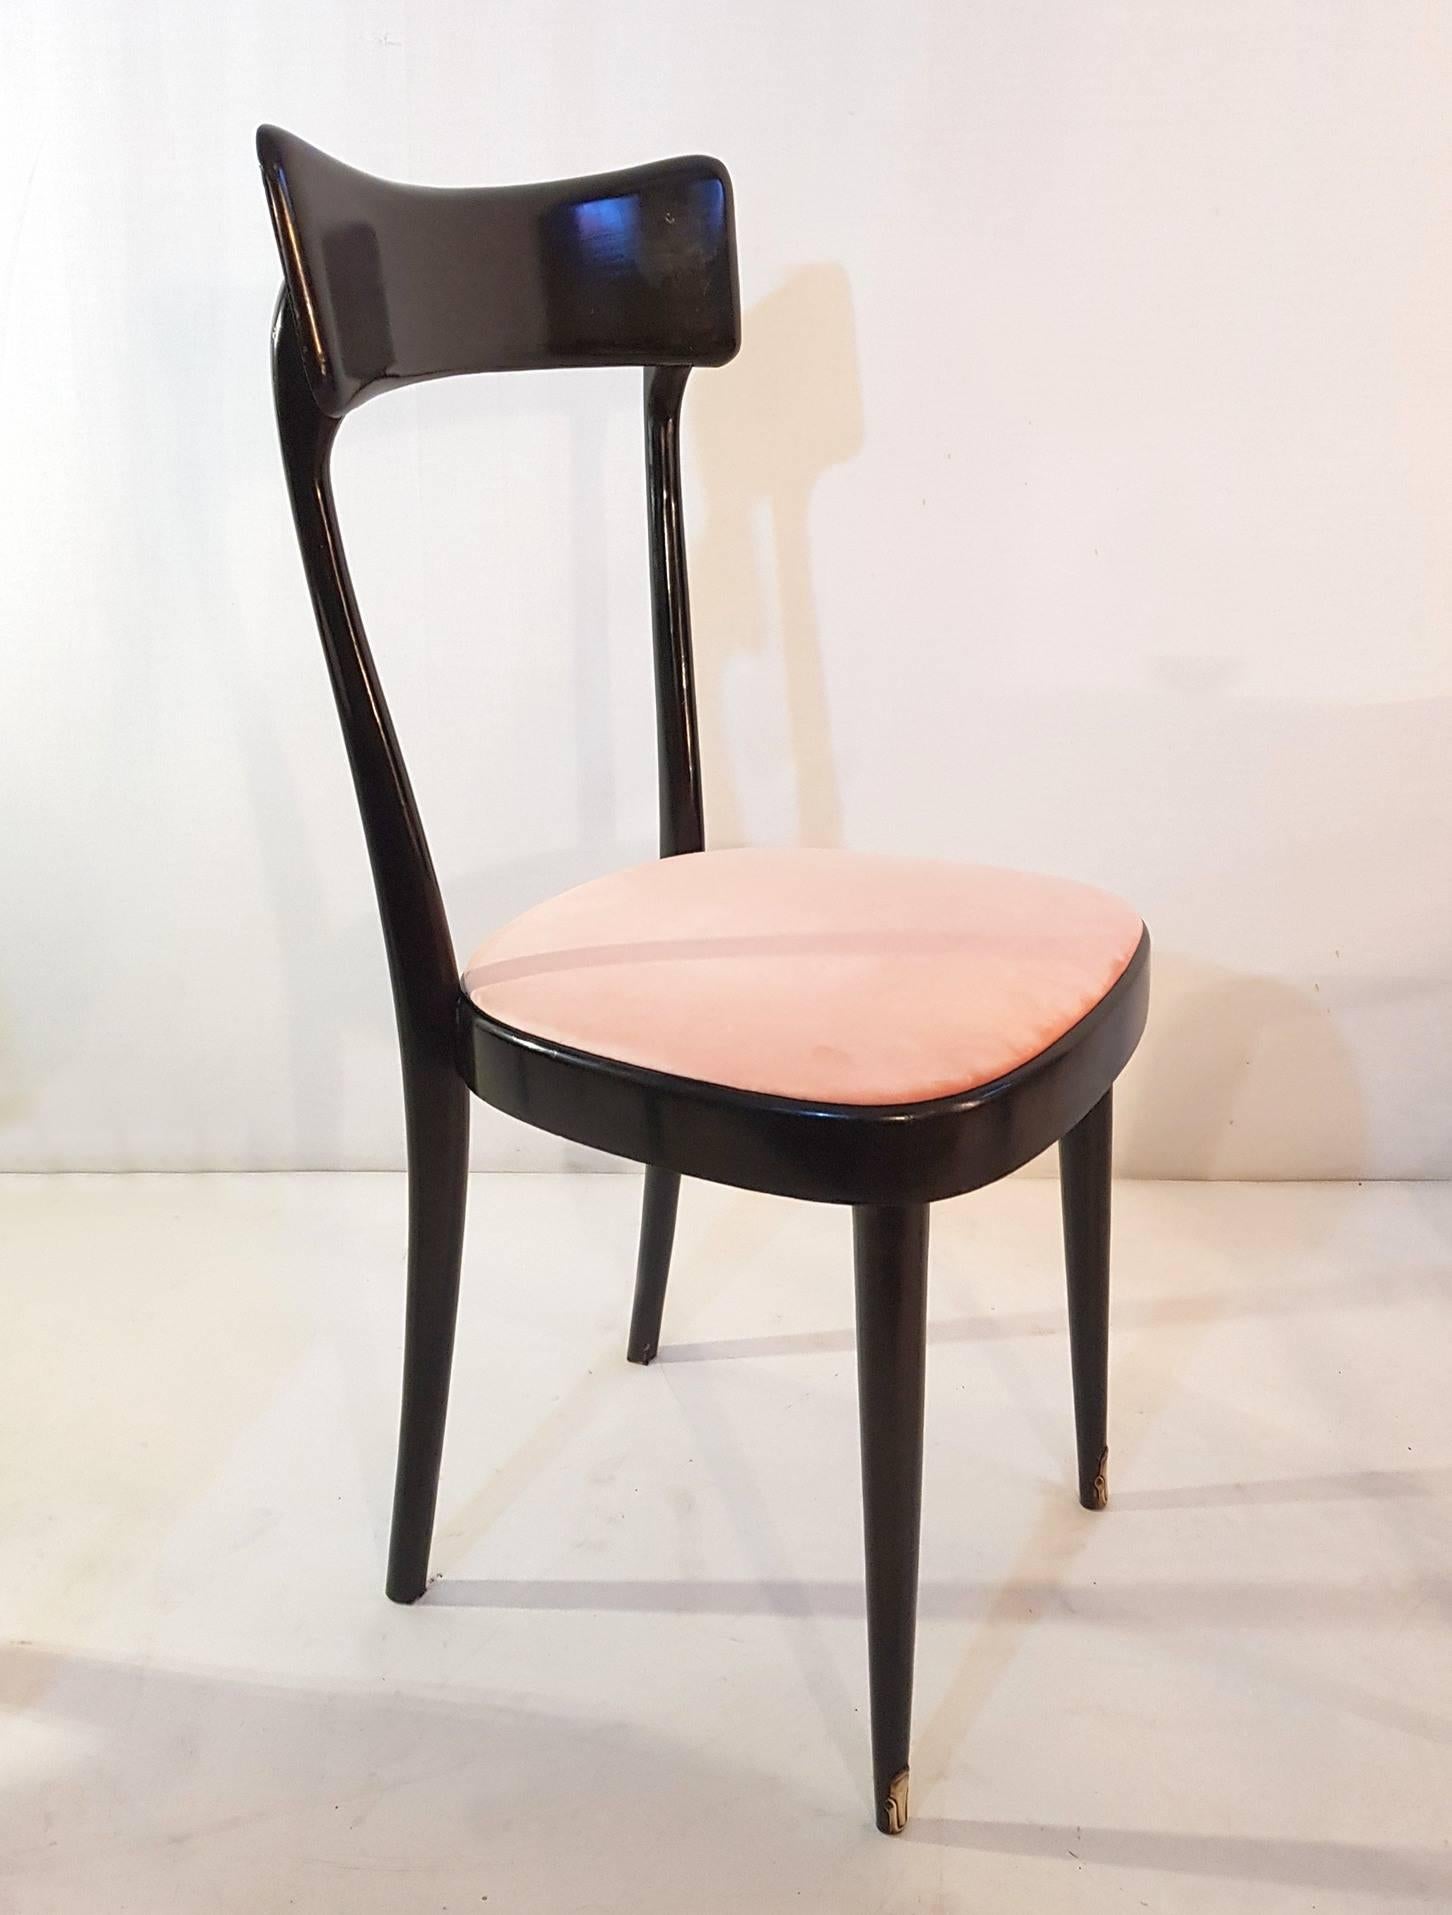 A set of six dining chairs in the manner of Ico Parisi. Made from wood that is stained black and seats covered in a brand new pastel pink cotton velvet. At the base of the legs there are original brass fittings.

These chairs have recently been